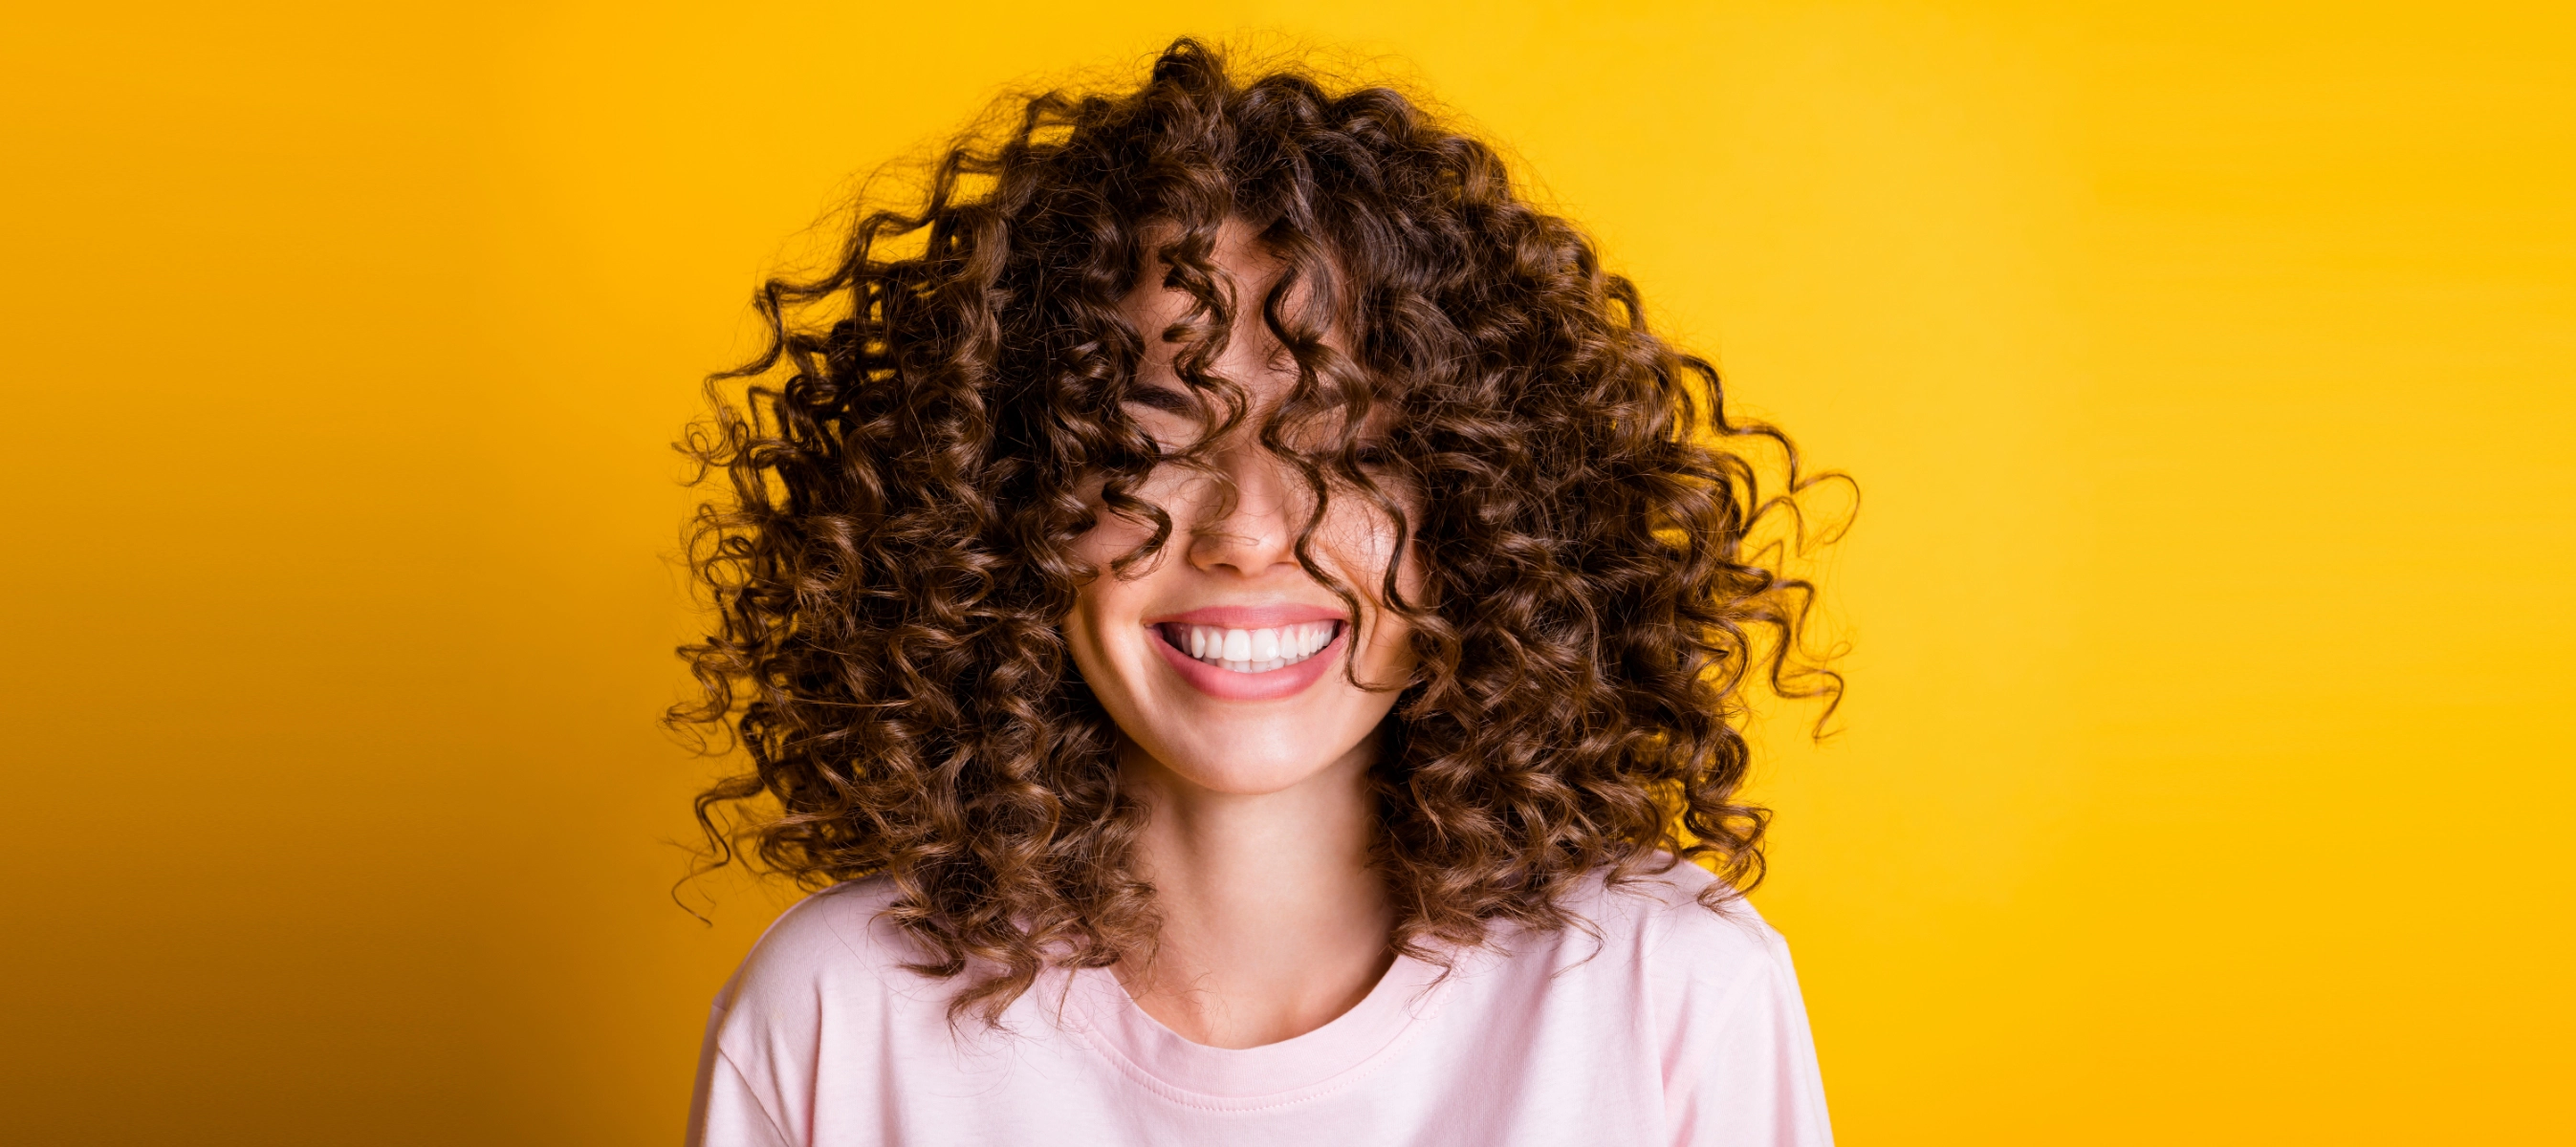 woman with 3a curly hair smiling with her eyes closed as she stands in front of a yellow background 